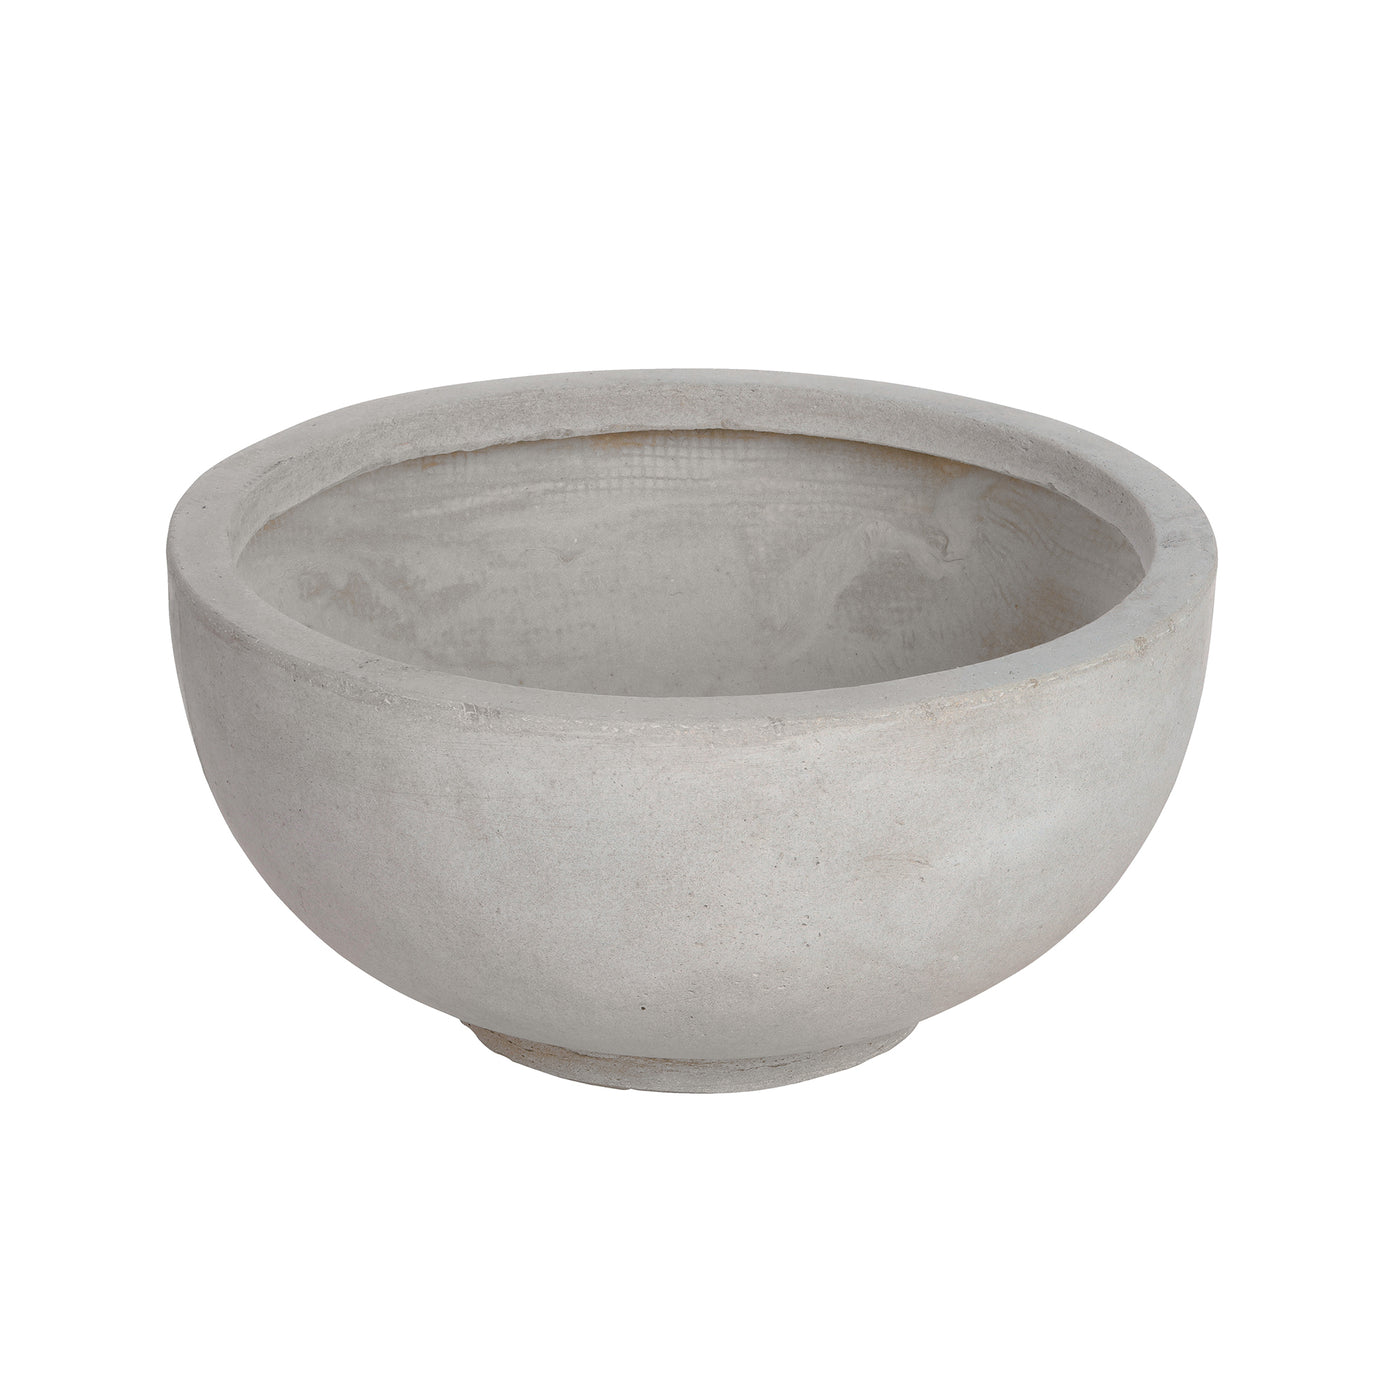 Finest quality stonecast bowl planter in light grey